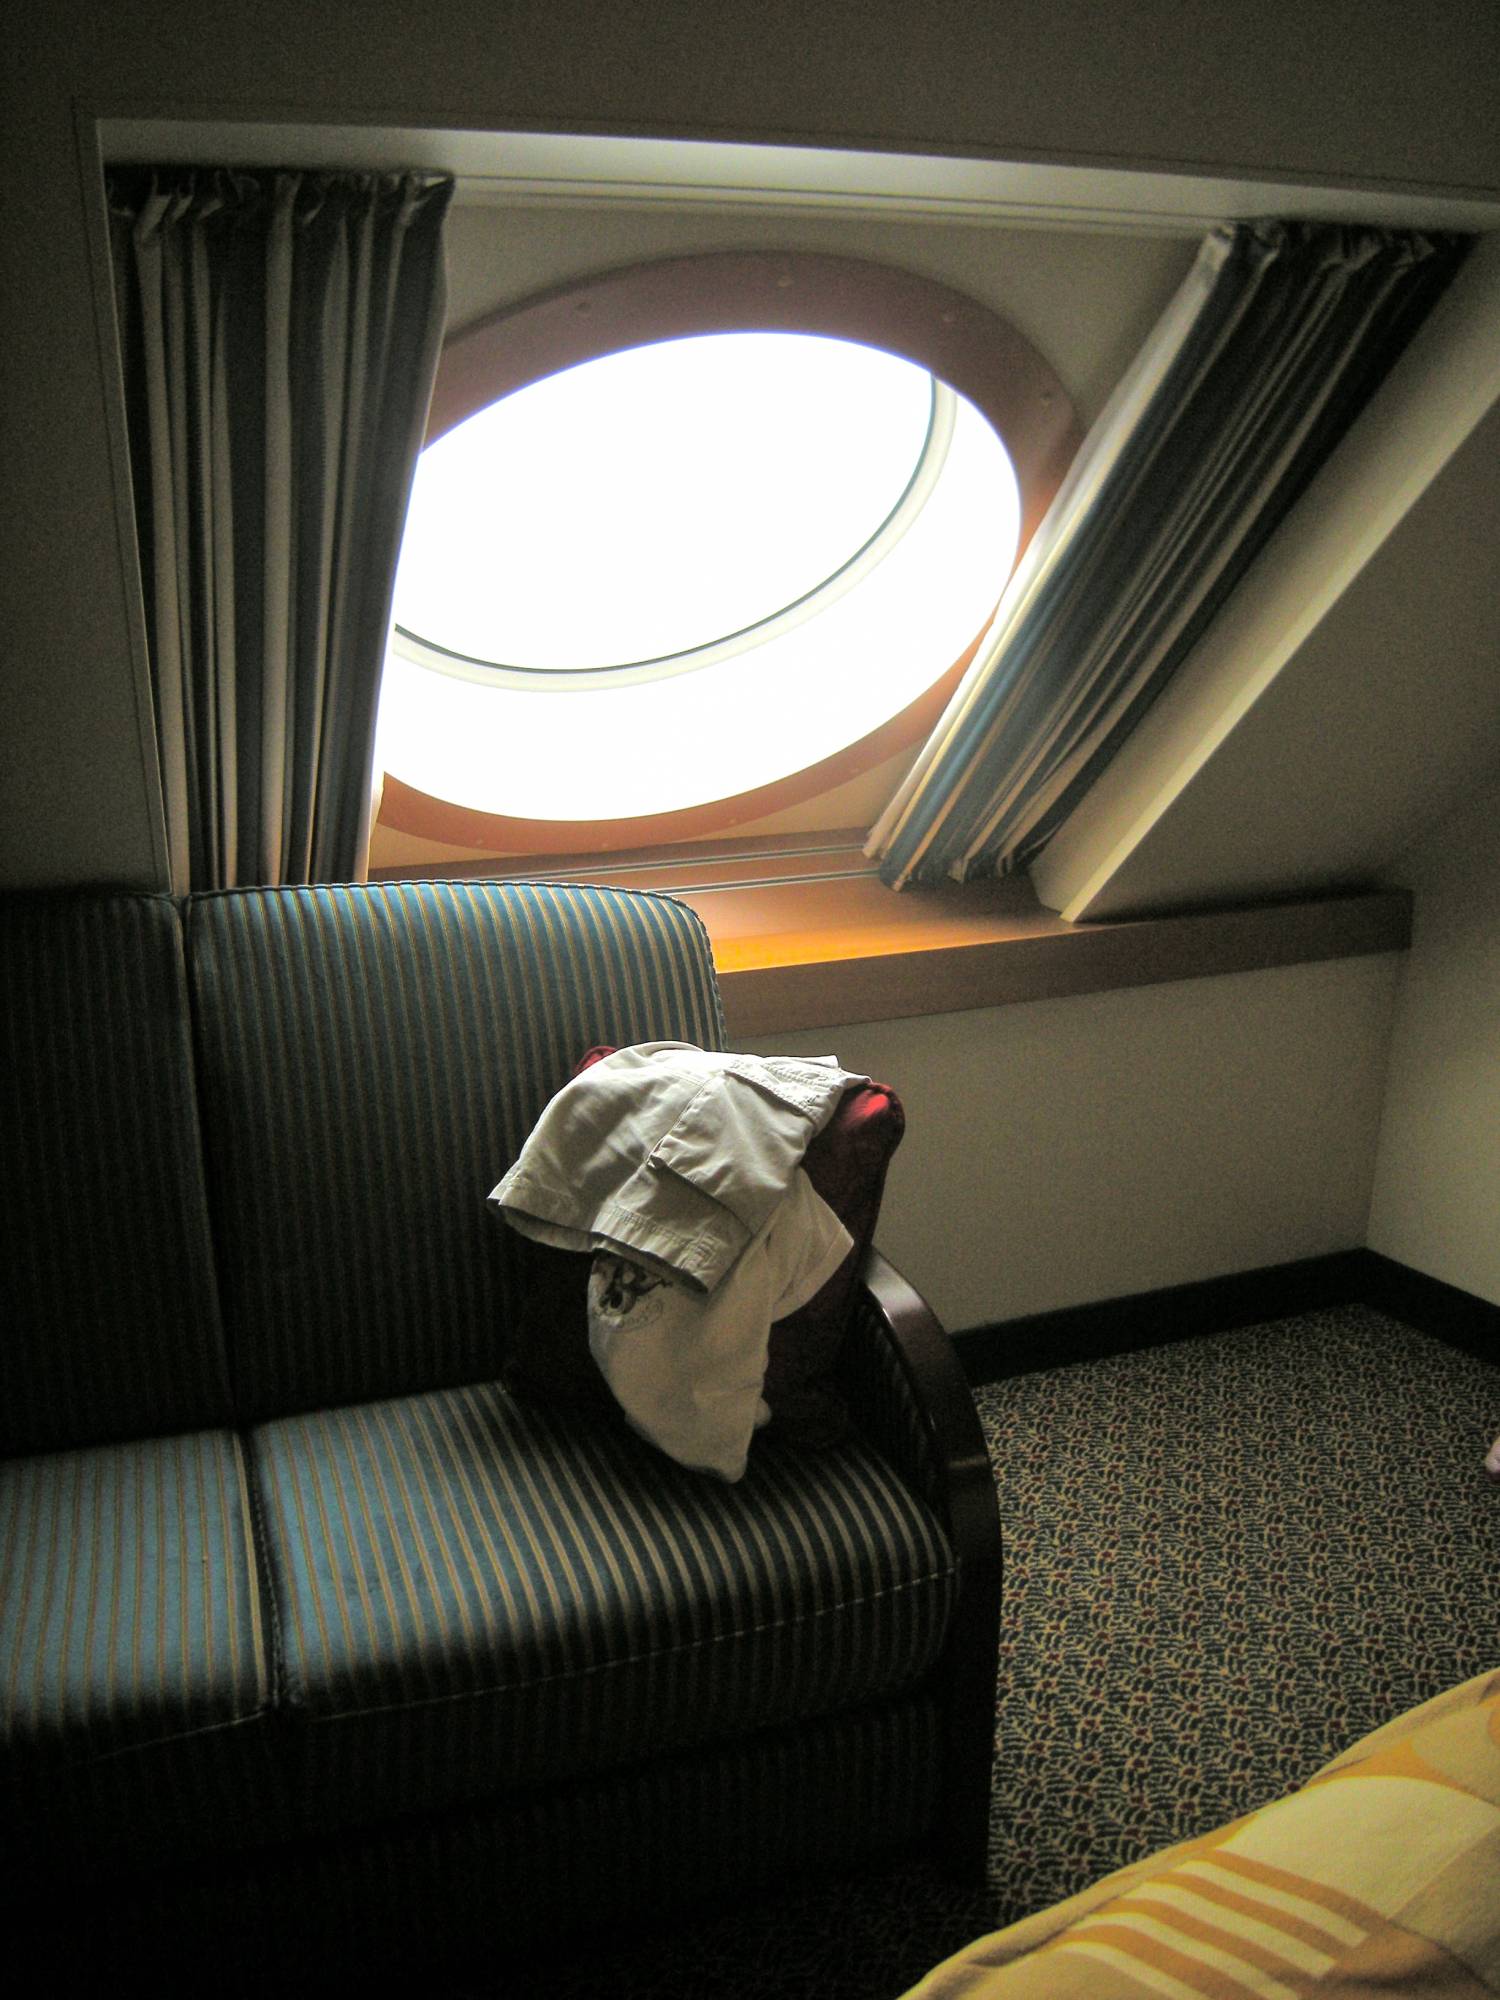 Disney Dream - Porthole in Stateroom 8500 (cat. 9A)